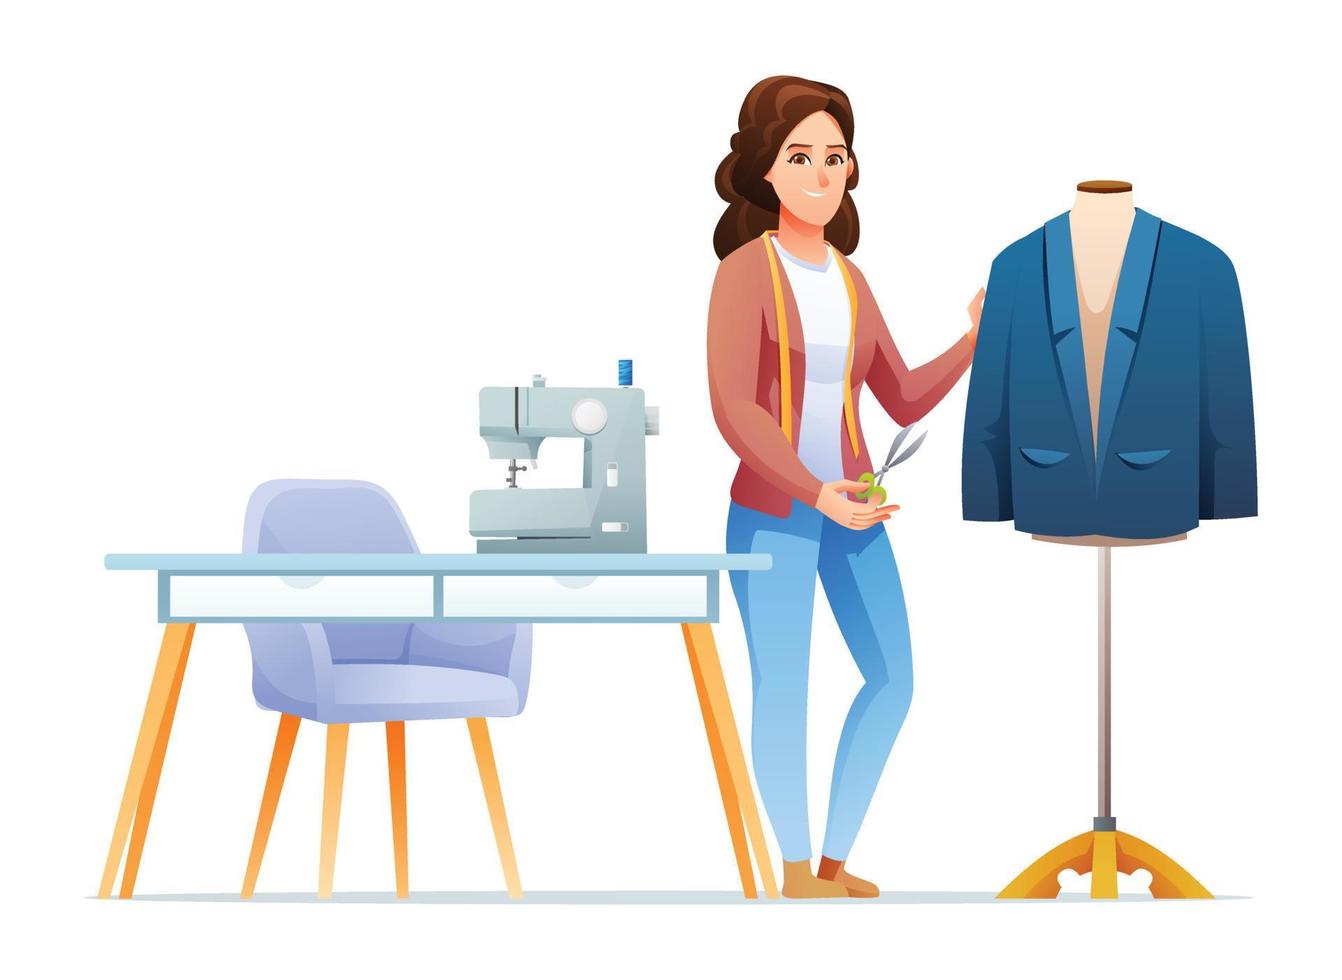 Professional woman tailor standing near the suit. Fashion designer, seamstress character illustration vector